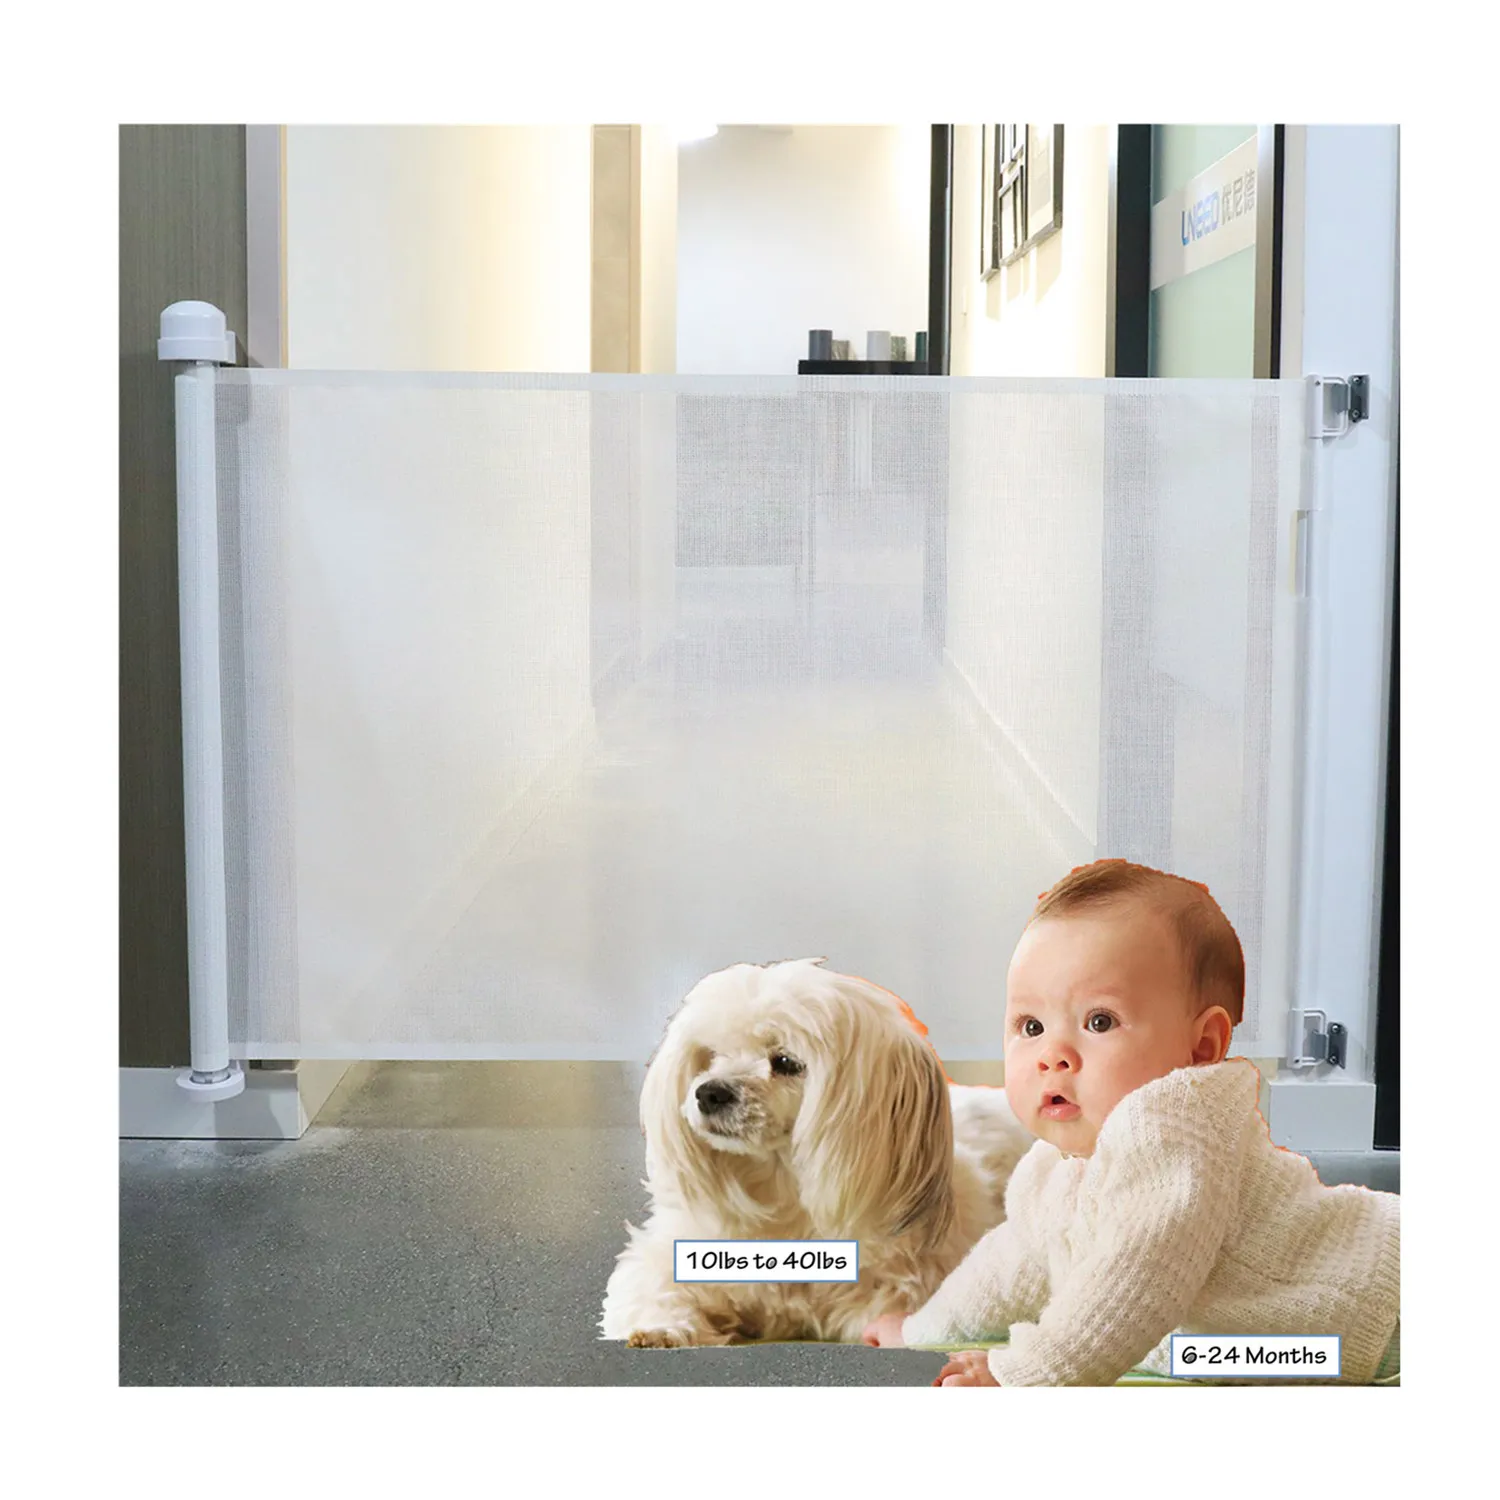 

Amazon Hot Selling Retractable Baby Gate 33 Inch Tall Extends To 55 Inch Wide Extra Wide Baby or Pet Dog Mesh Safety Gate, White,grey, black